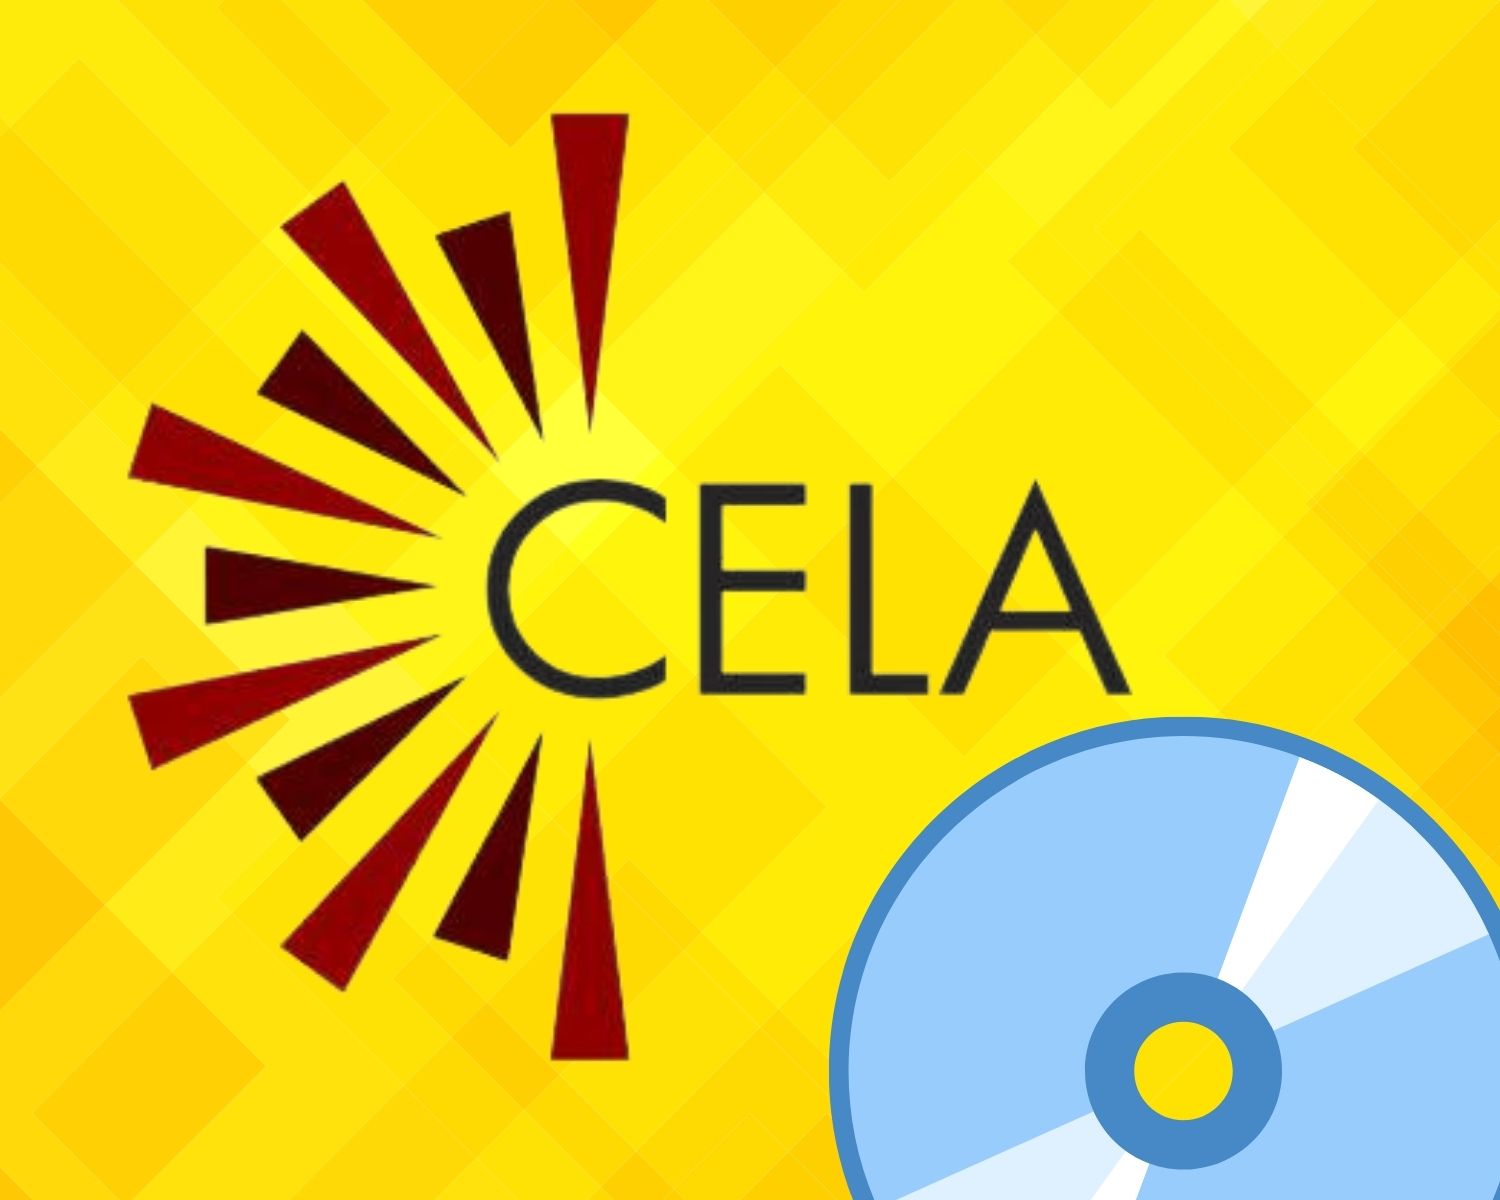 The Cela logo and accompained with a CD in the bottom right corner